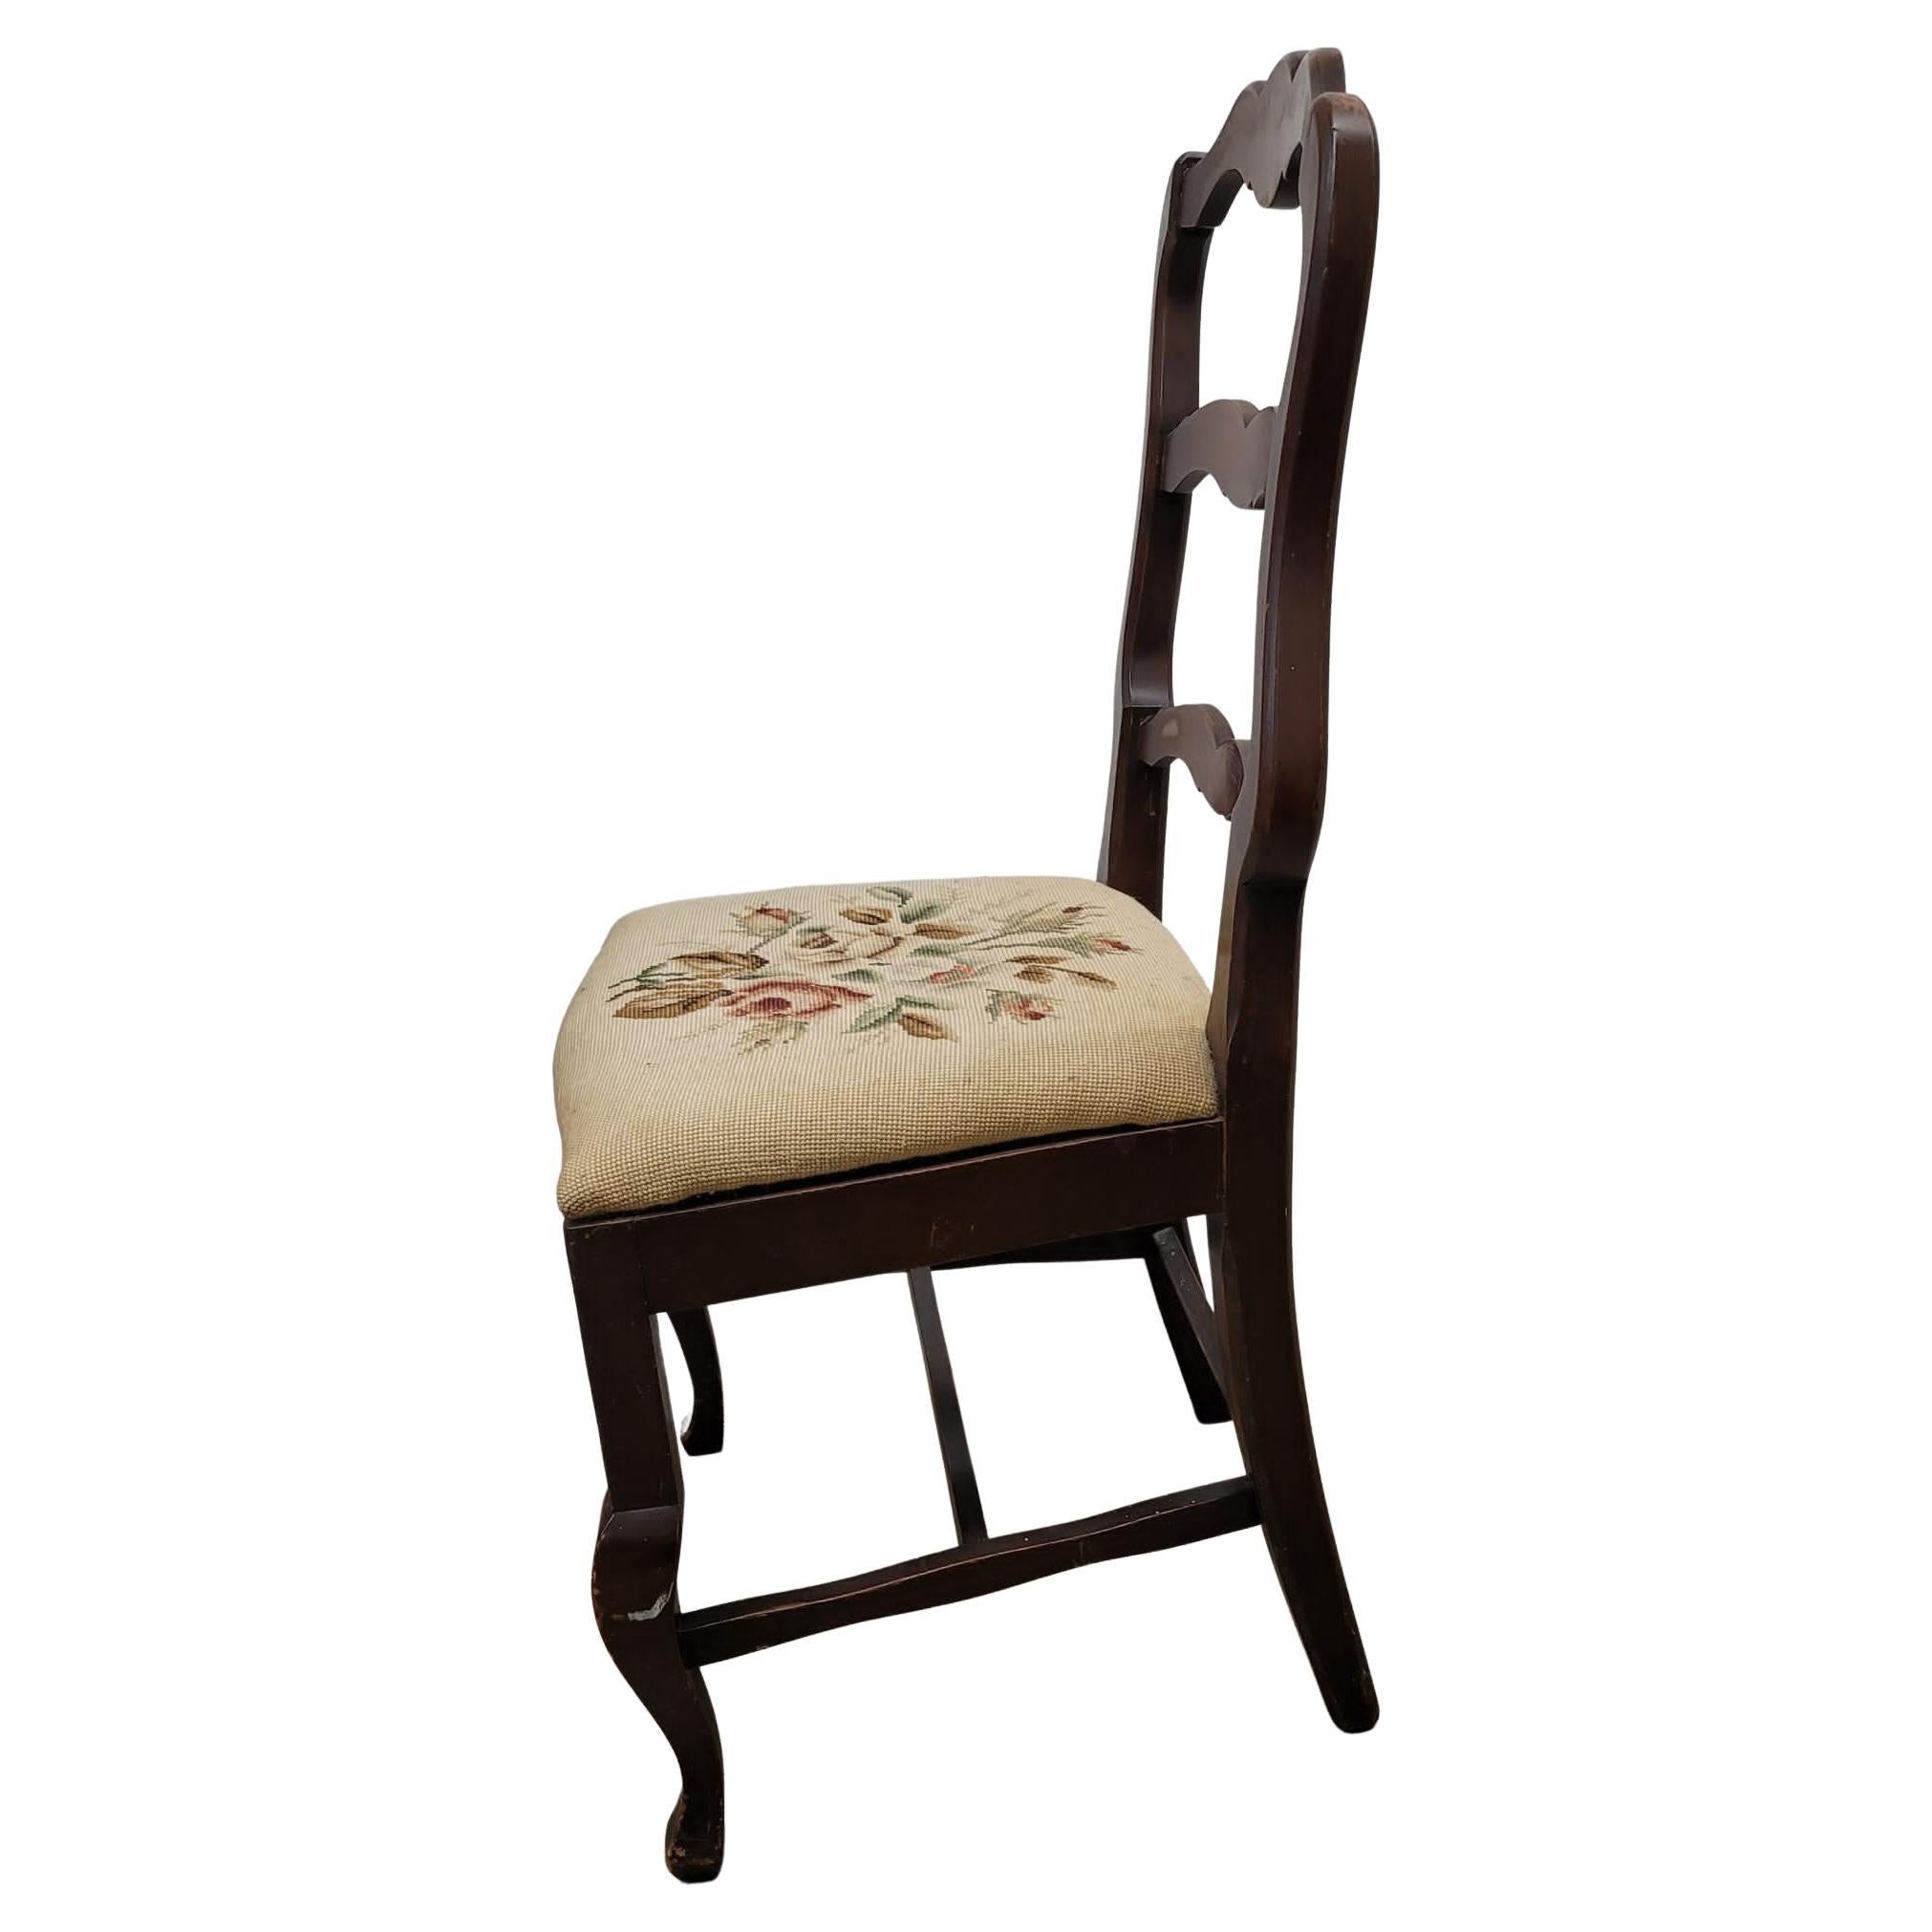 American Reischman Furniture Ladder Back Mahogany Needlepoint Upholstered Chair For Sale